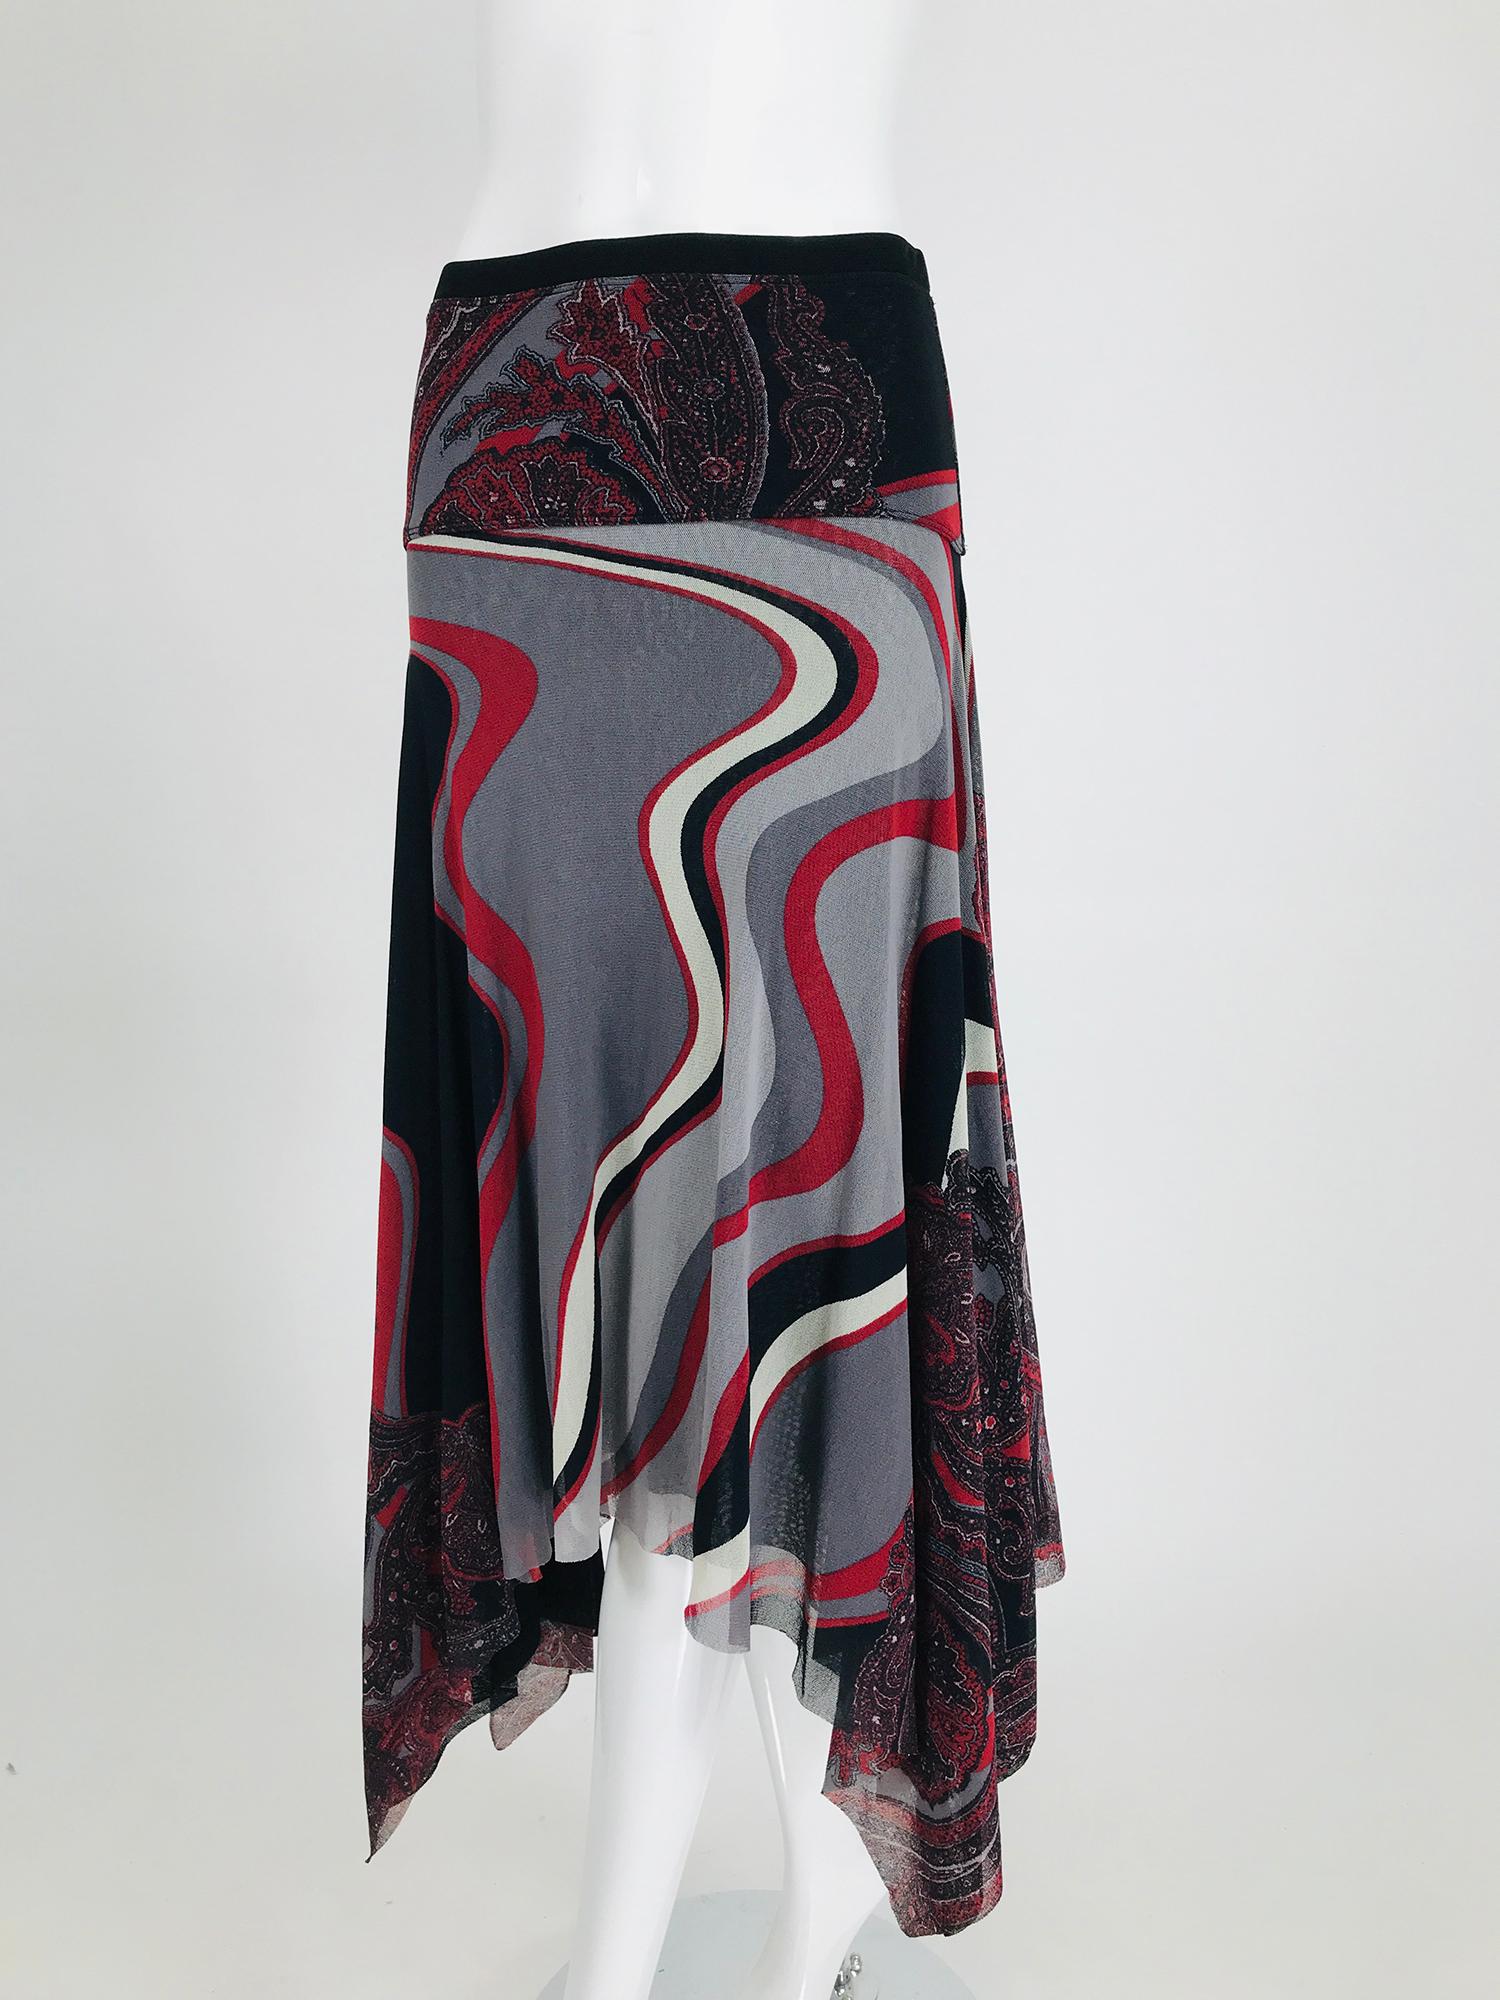  John Paul Gaultier Soleil printed mesh asymmetrical skirt. Pull on skirt is lined in black mesh. The hemline is irregular. The print is a paisley at the hip and swirls of greys & reds from the hip to the hem. Fits a size small.
     In excellent